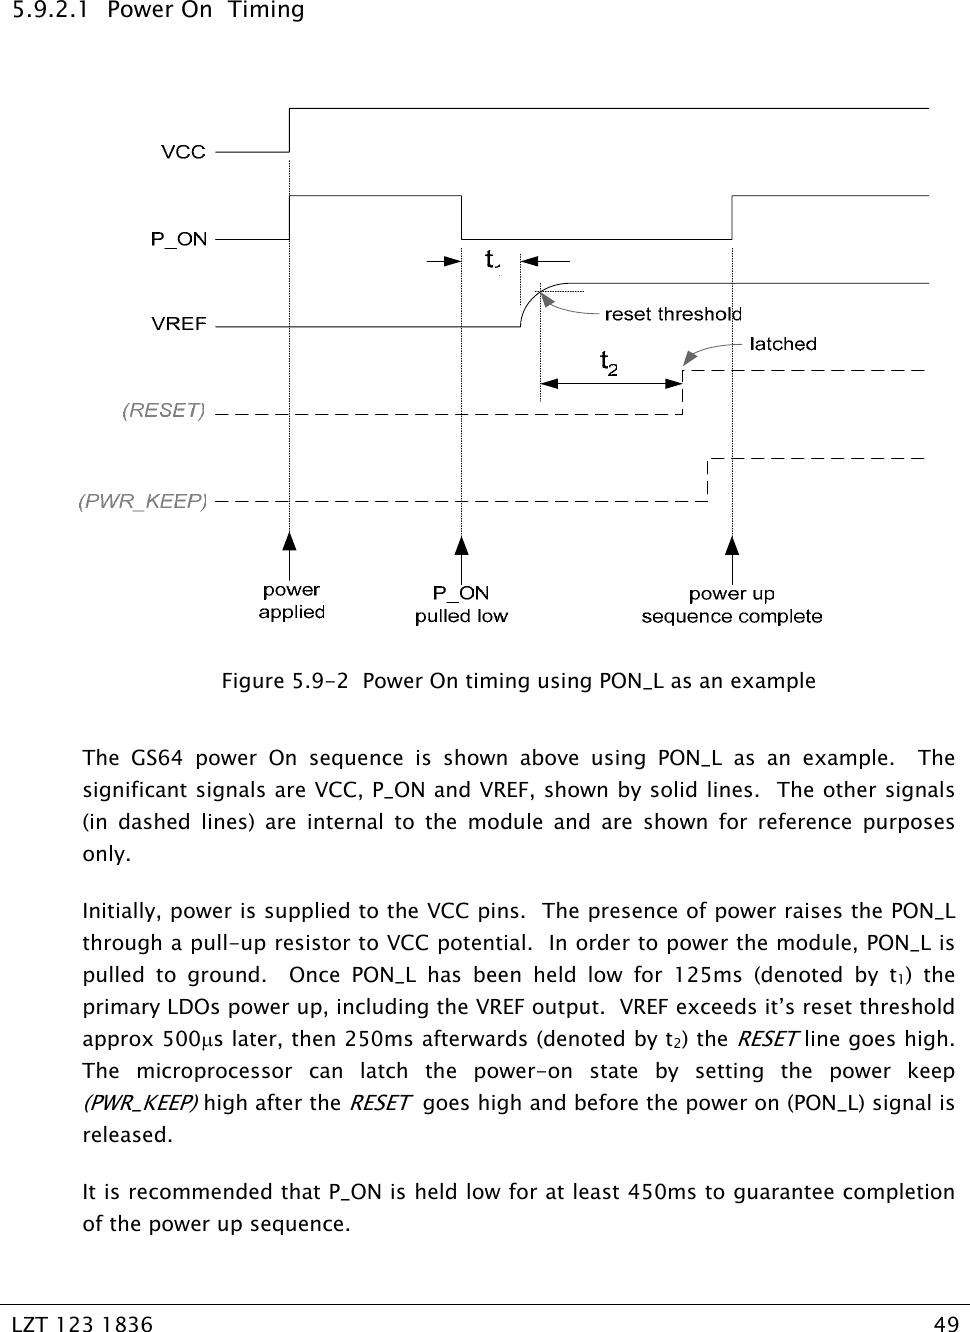   LZT 123 1836  49    5.9.2.1  Power On  Timing   Figure 5.9-2  Power On timing using PON_L as an example  The GS64 power On sequence is shown above using PON_L as an example.  The significant signals are VCC, P_ON and VREF, shown by solid lines.  The other signals (in dashed lines) are internal to the module and are shown for reference purposes only. Initially, power is supplied to the VCC pins.  The presence of power raises the PON_L through a pull-up resistor to VCC potential.  In order to power the module, PON_L is pulled to ground.  Once PON_L has been held low for 125ms (denoted by t1) the primary LDOs power up, including the VREF output.  VREF exceeds it’s reset threshold approx 500µs later, then 250ms afterwards (denoted by t2) the RESET line goes high.  The microprocessor can latch the power-on state by setting the power keep (PWR_KEEP) high after the RESET  goes high and before the power on (PON_L) signal is released. It is recommended that P_ON is held low for at least 450ms to guarantee completion of the power up sequence.   